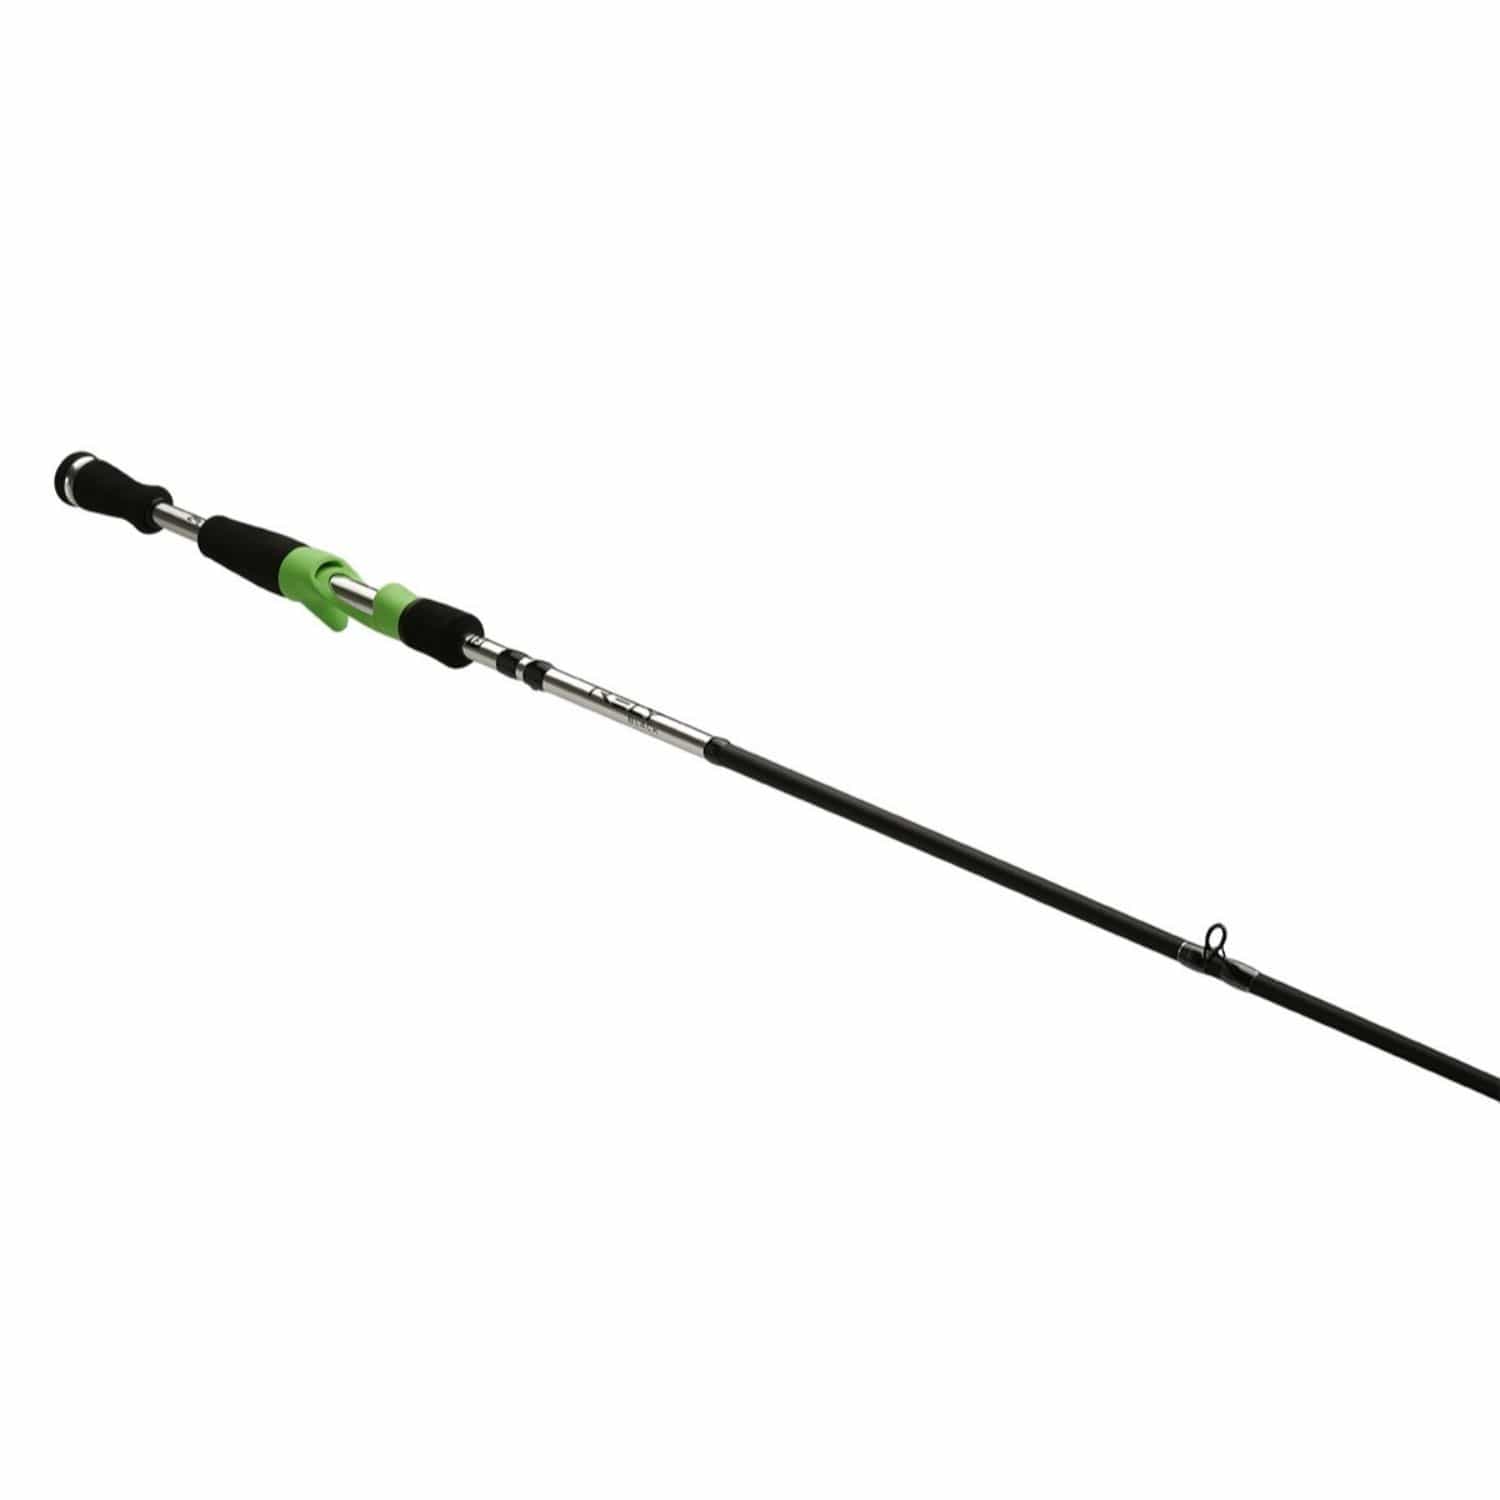 13 Fishing Fishing : Rods 13 Fishing Rely 6 ft 7 in MH Casting Rod